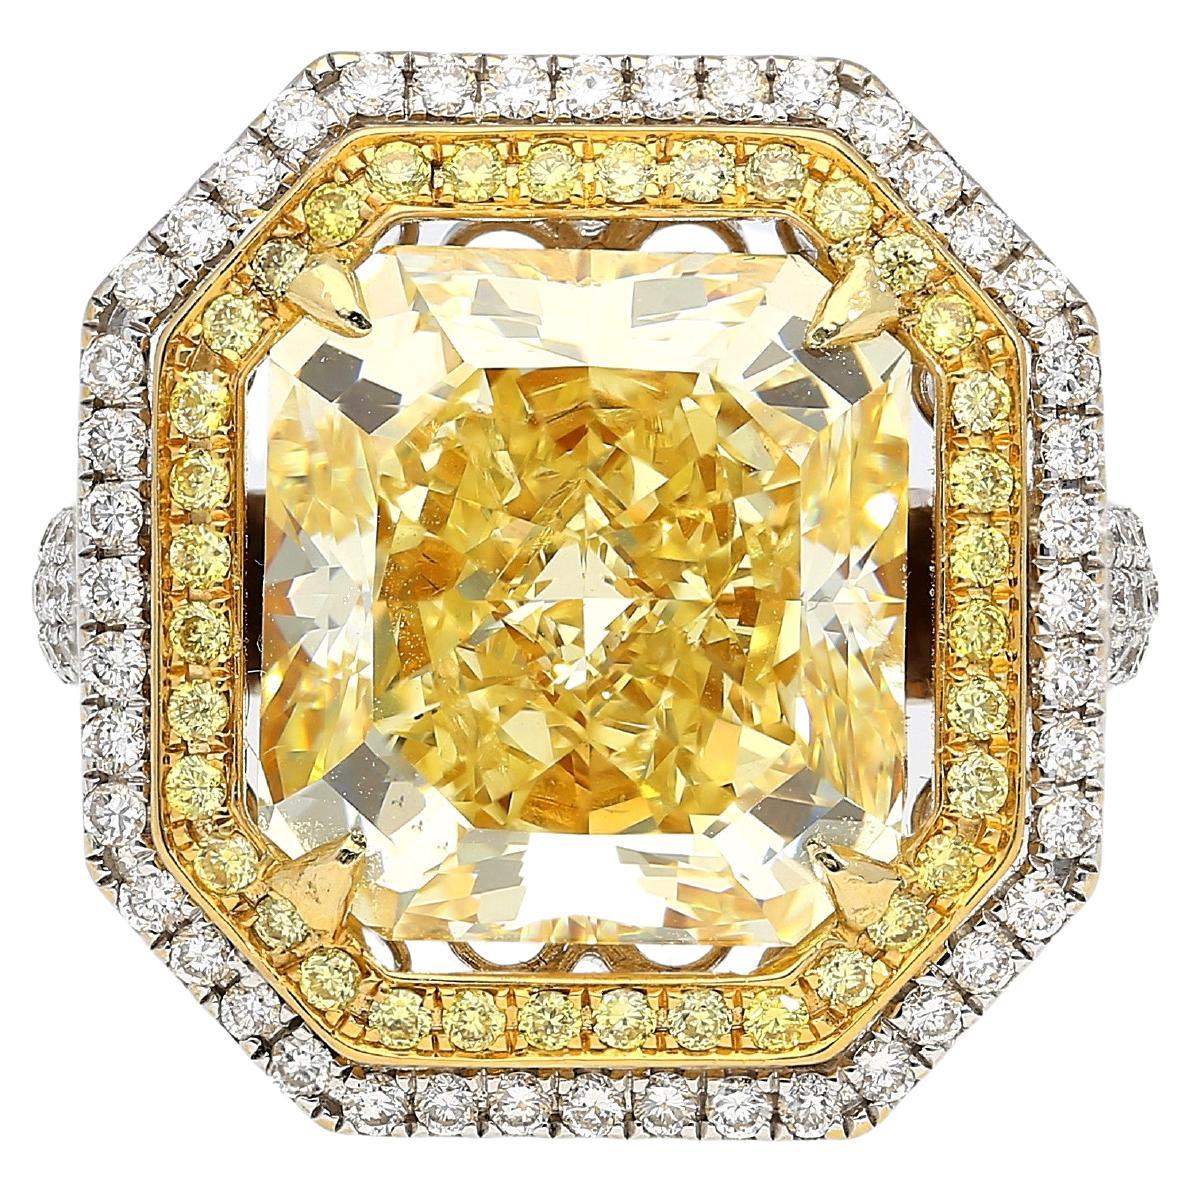 GIA Certified 10.88 Carat Fancy Yellow Radiant Cut Diamond Ring in White Gold For Sale